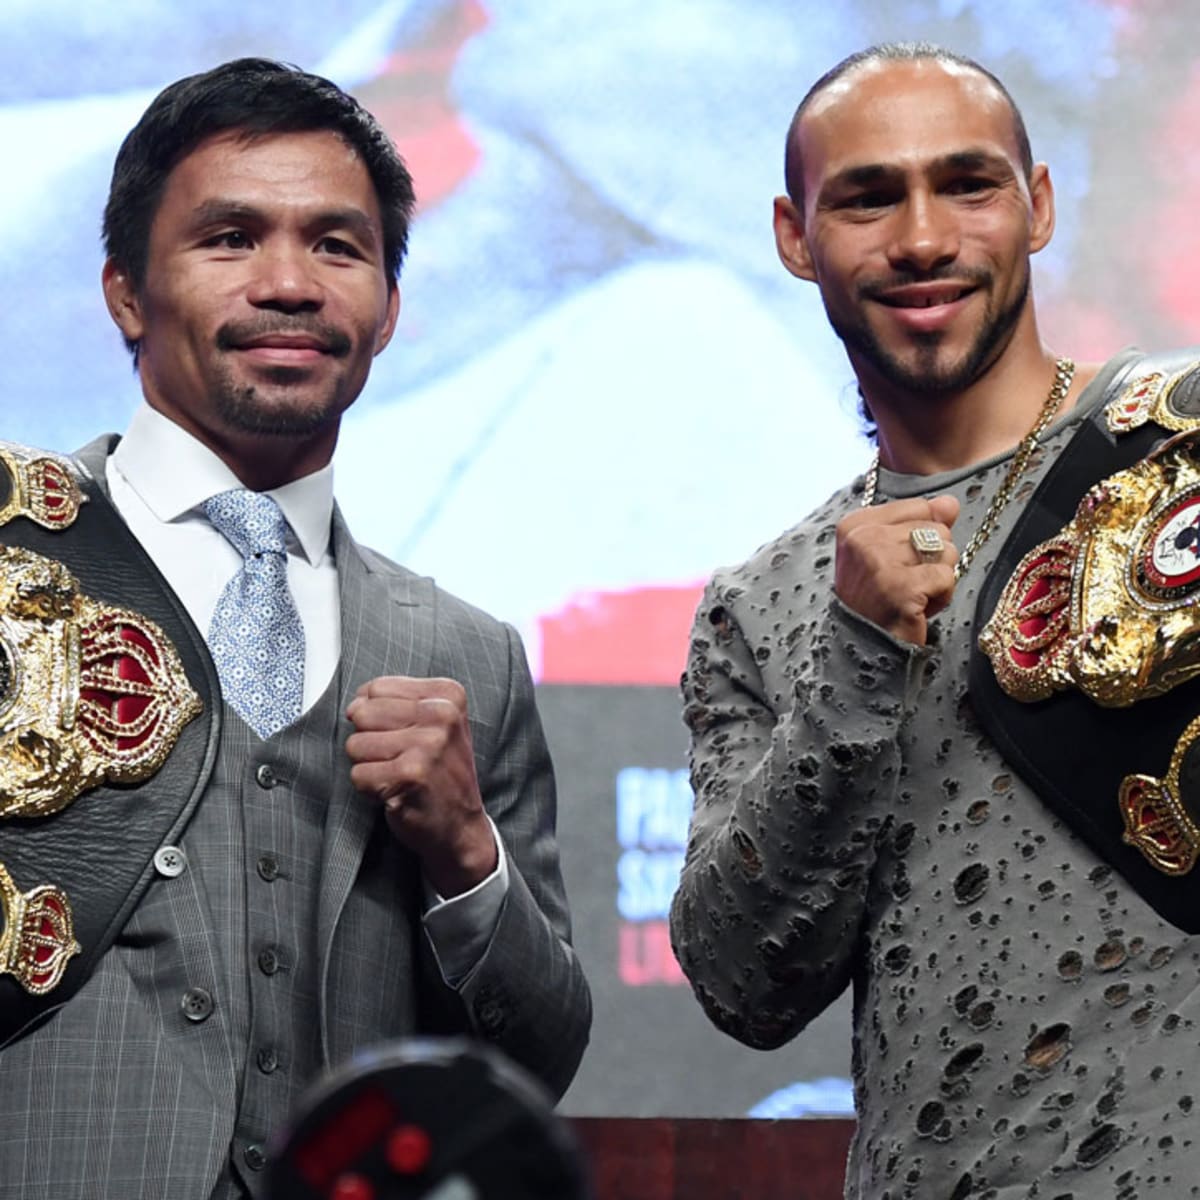 Manny Pacquiao vs Keith Thurman live stream Watch fight online, TV, time